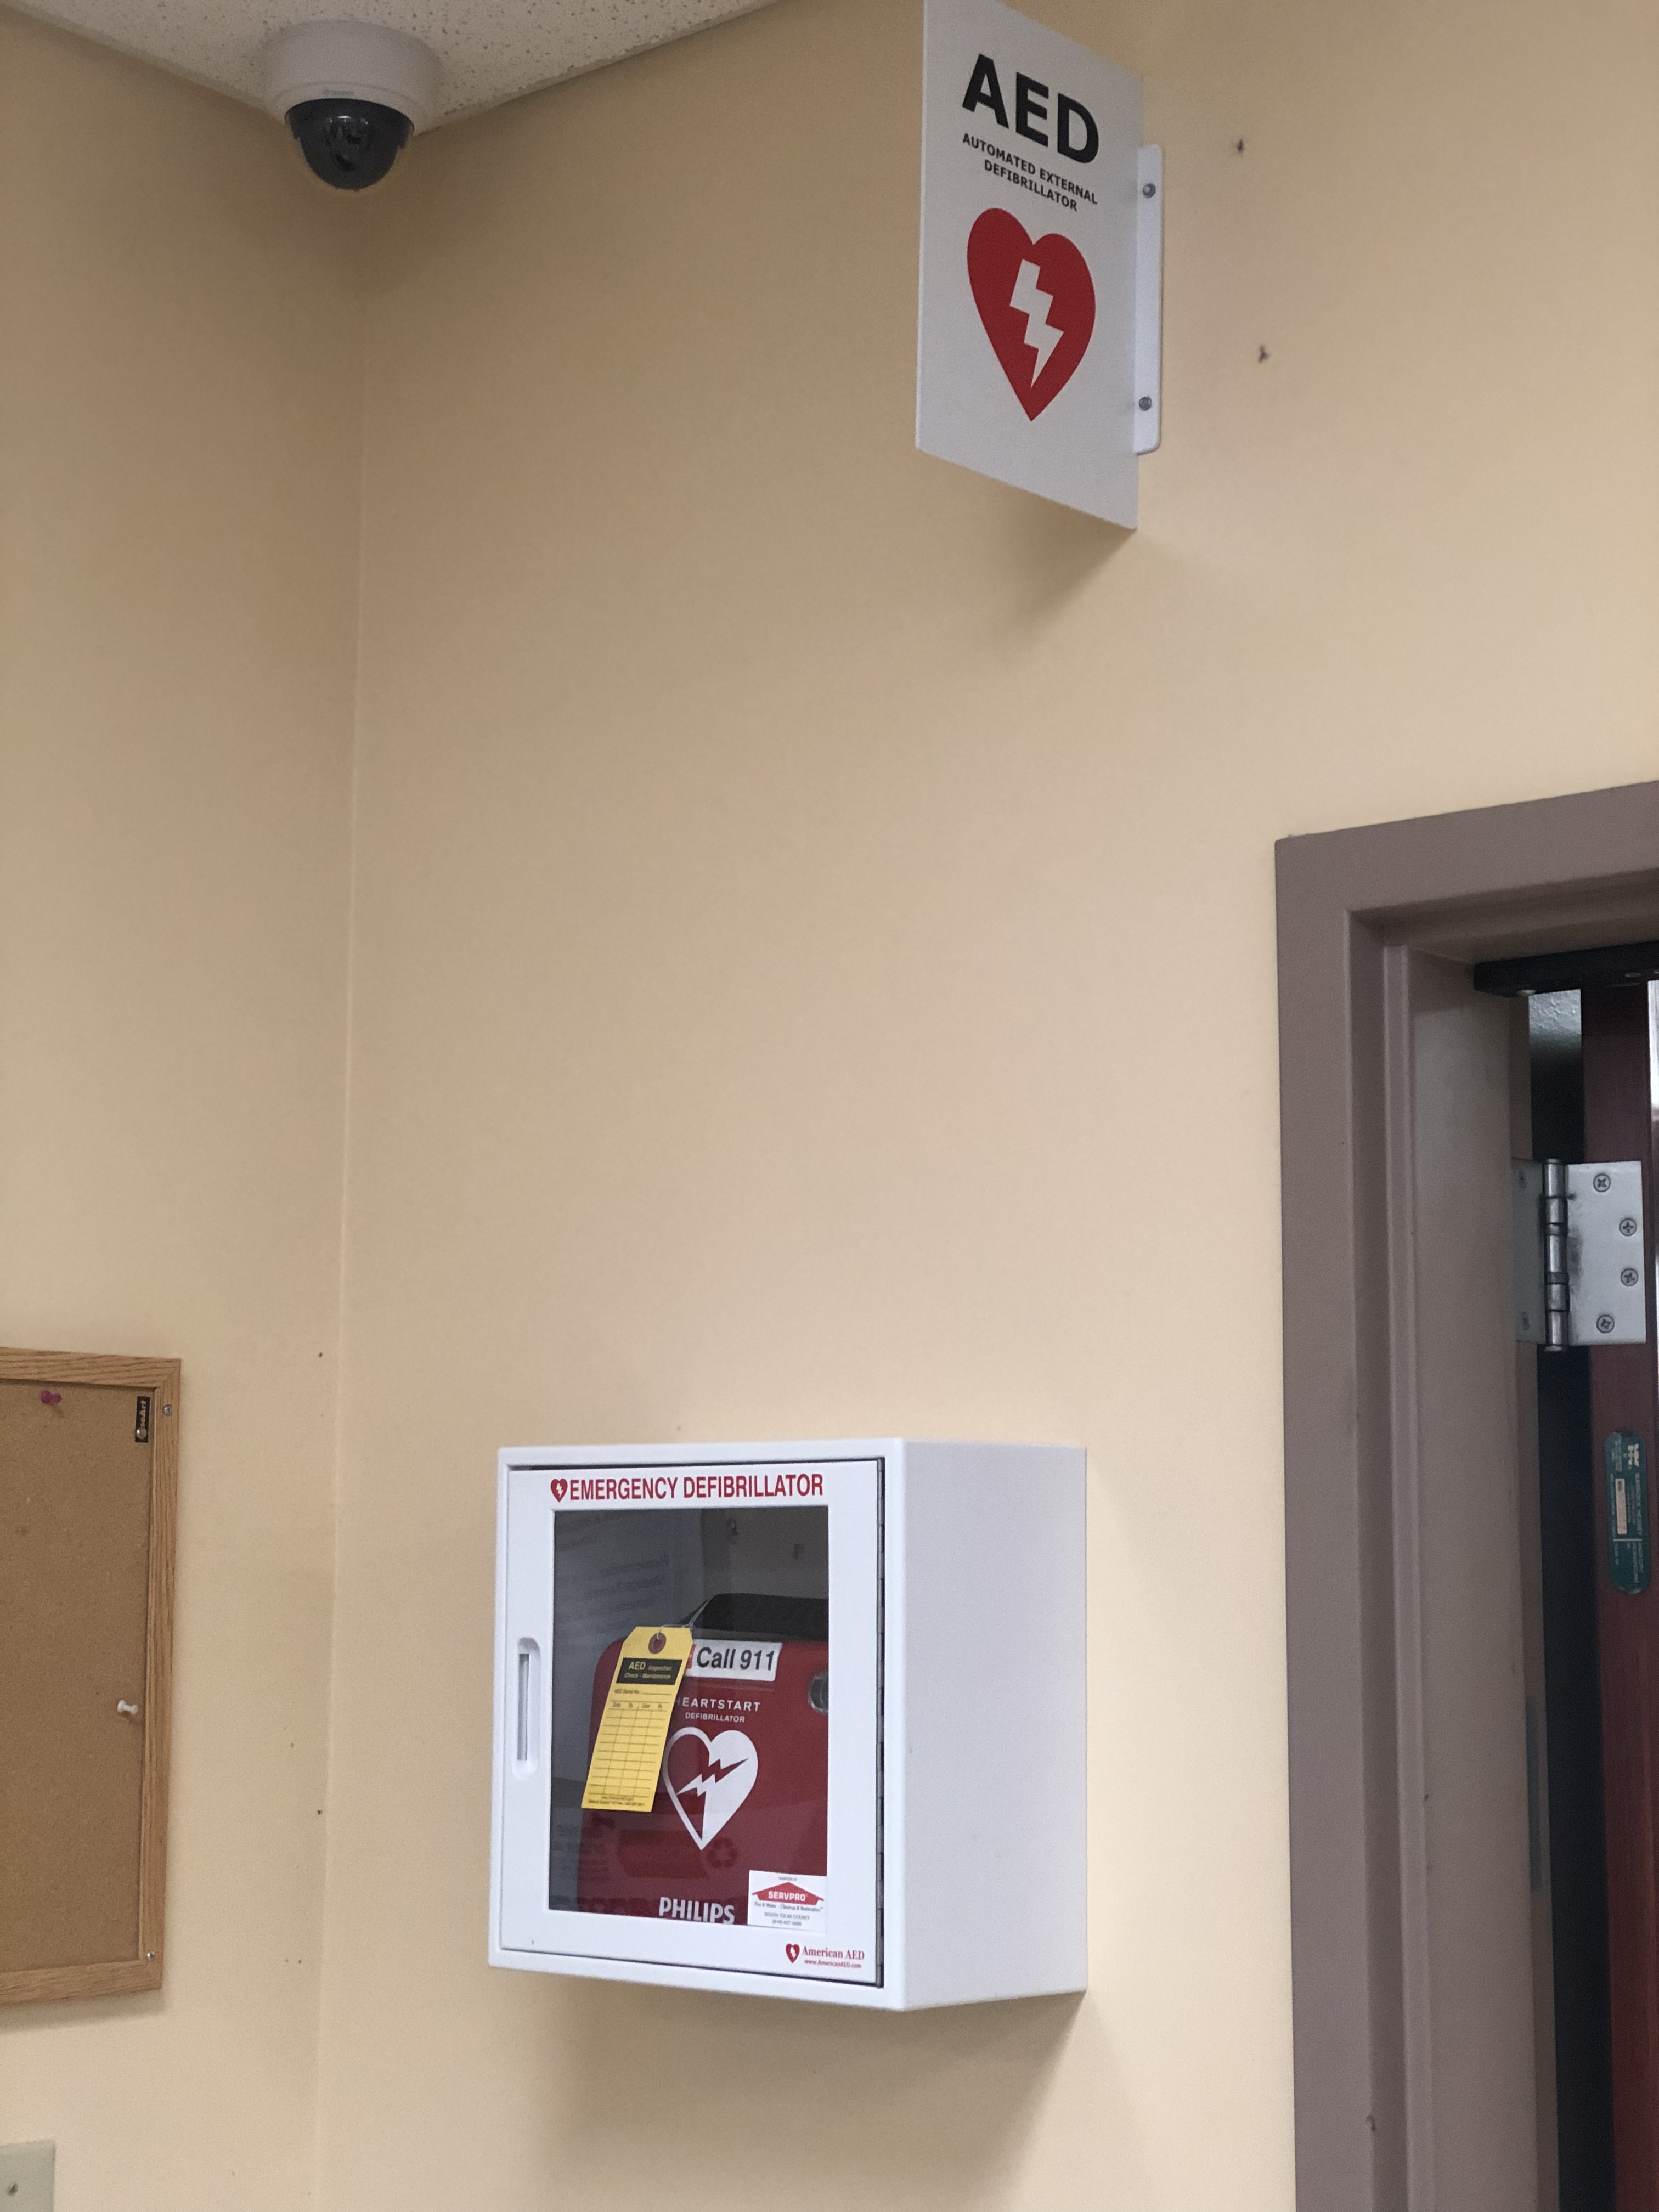 AED fully mounted on wall